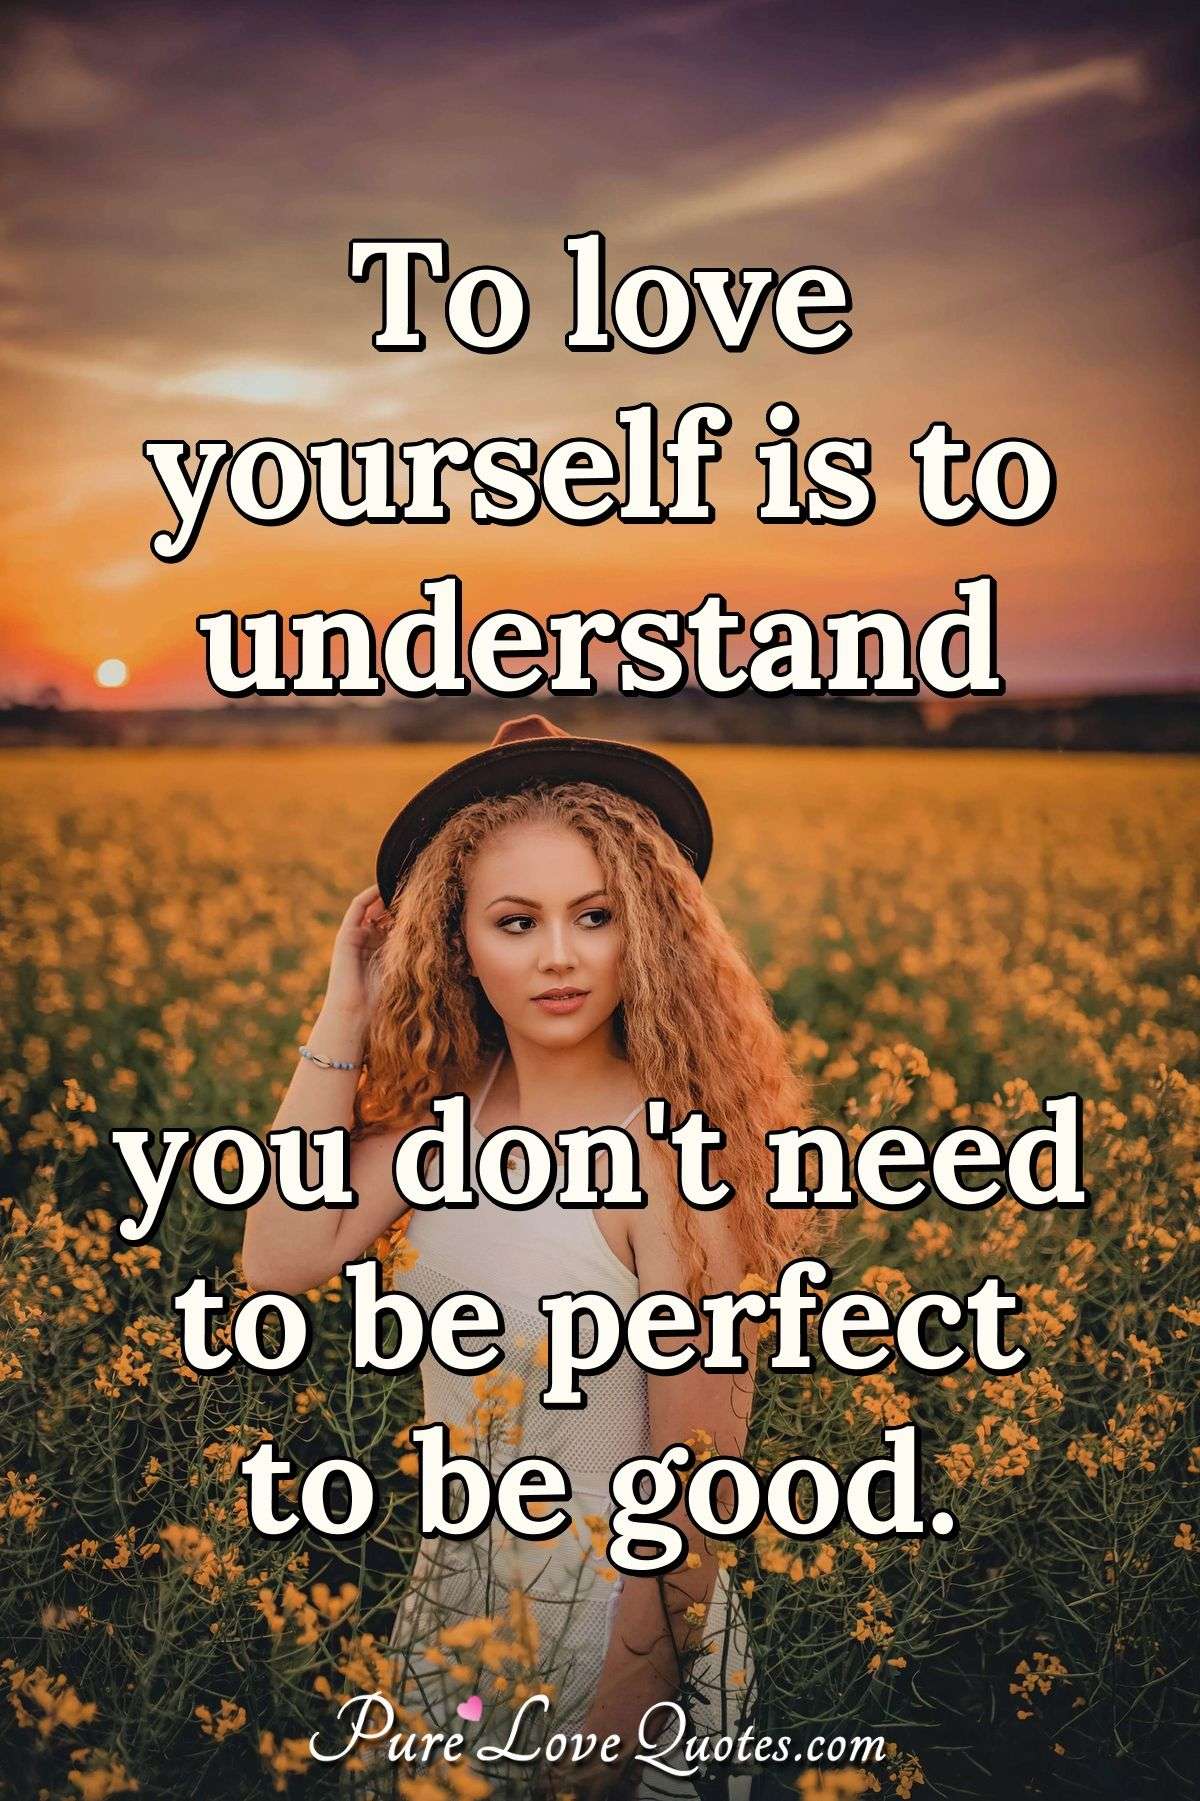 To Love Yourself Is To Understand You Don T Need To Be Perfect To Be Good Purelovequotes